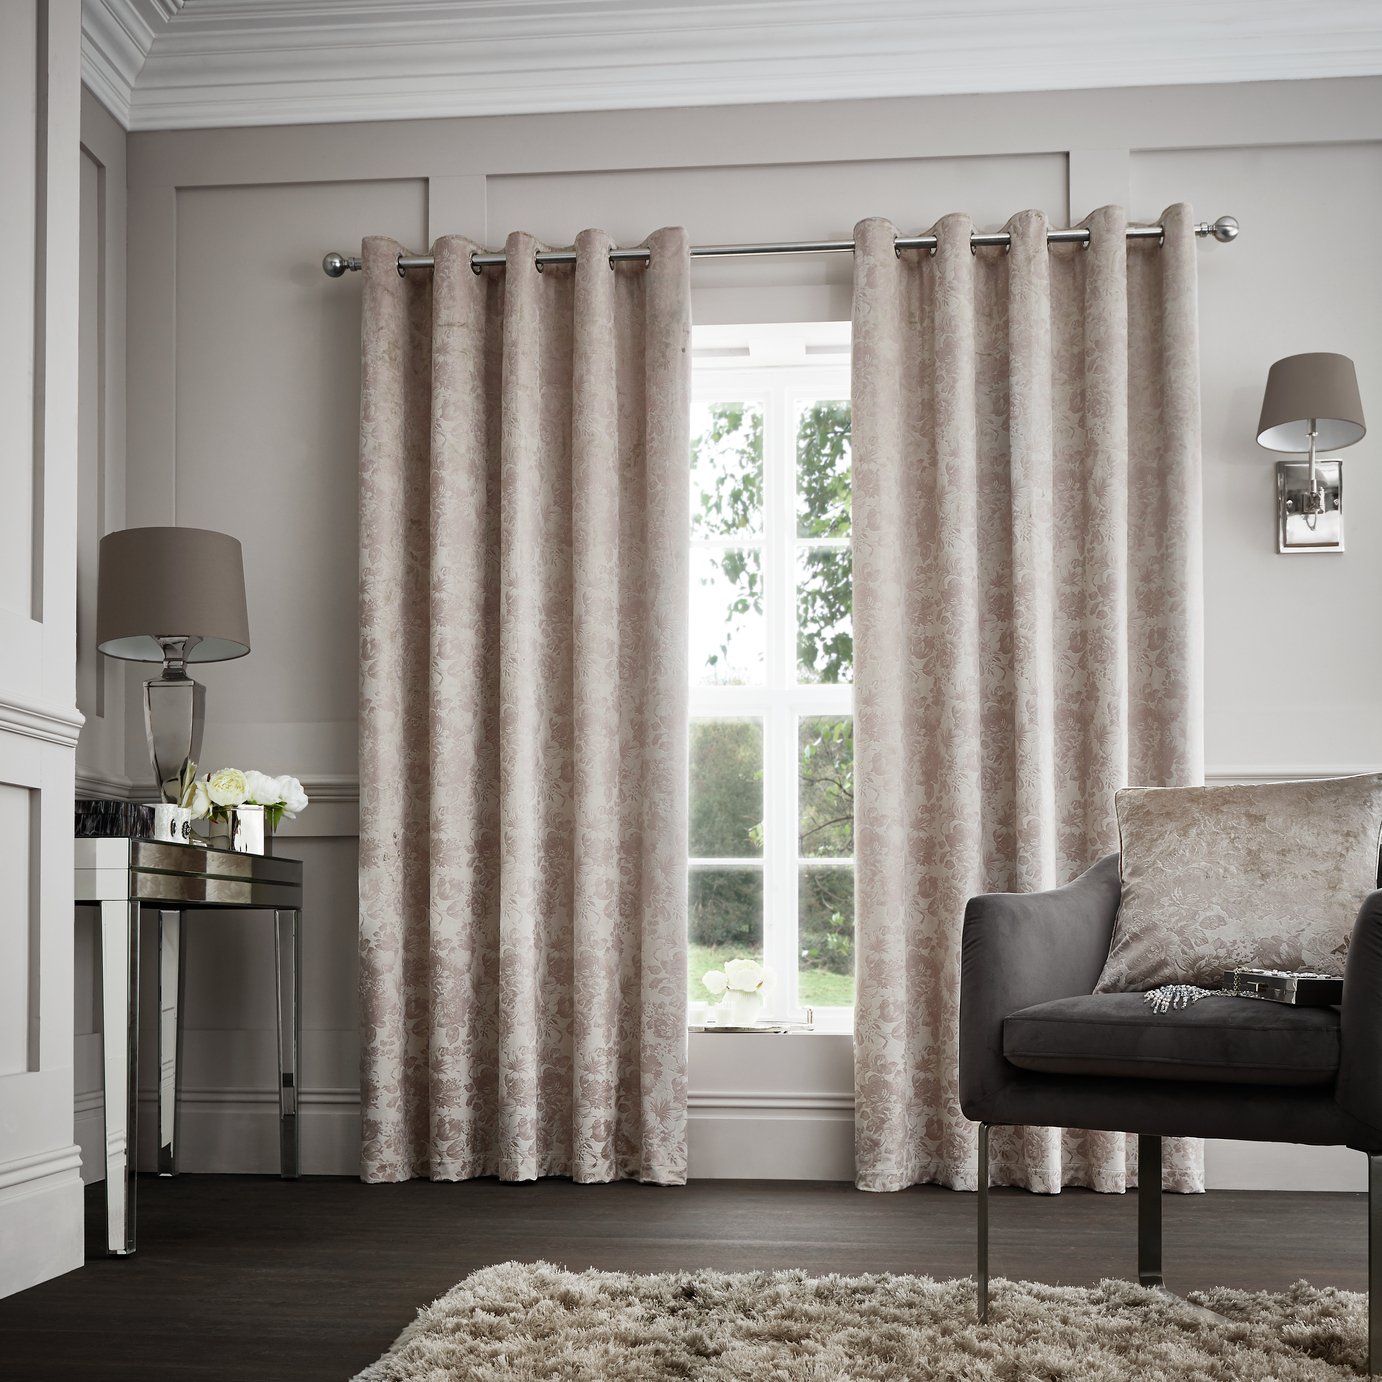 Curtina Downton Lined Curtains - 168x229cm - Mink